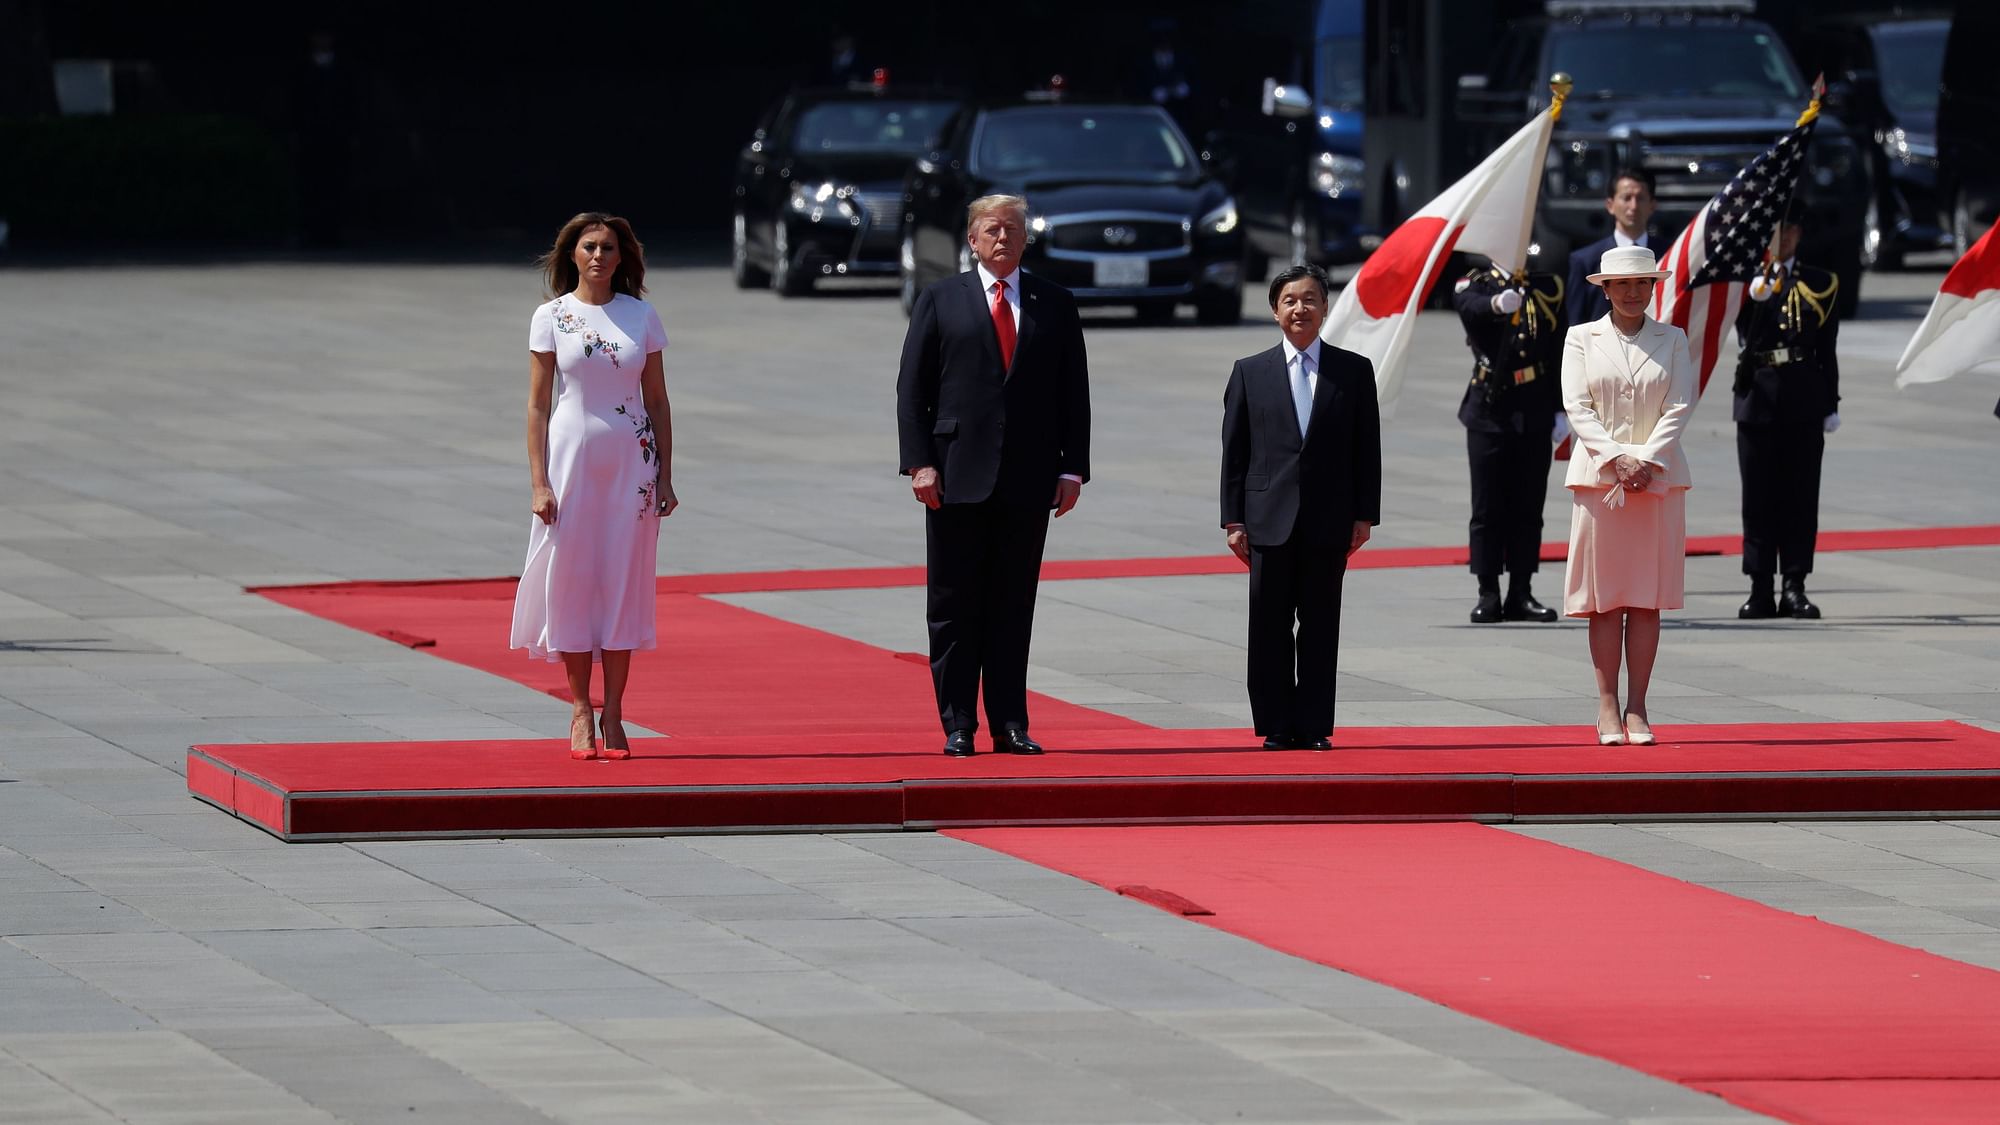 President Donald Trump and first lady Melania Trump participate with Japanese Emperor Naruhito and Empress Masako during an Imperial Palace welcome ceremony at the Imperial Palace, Monday, 27 May 2019.